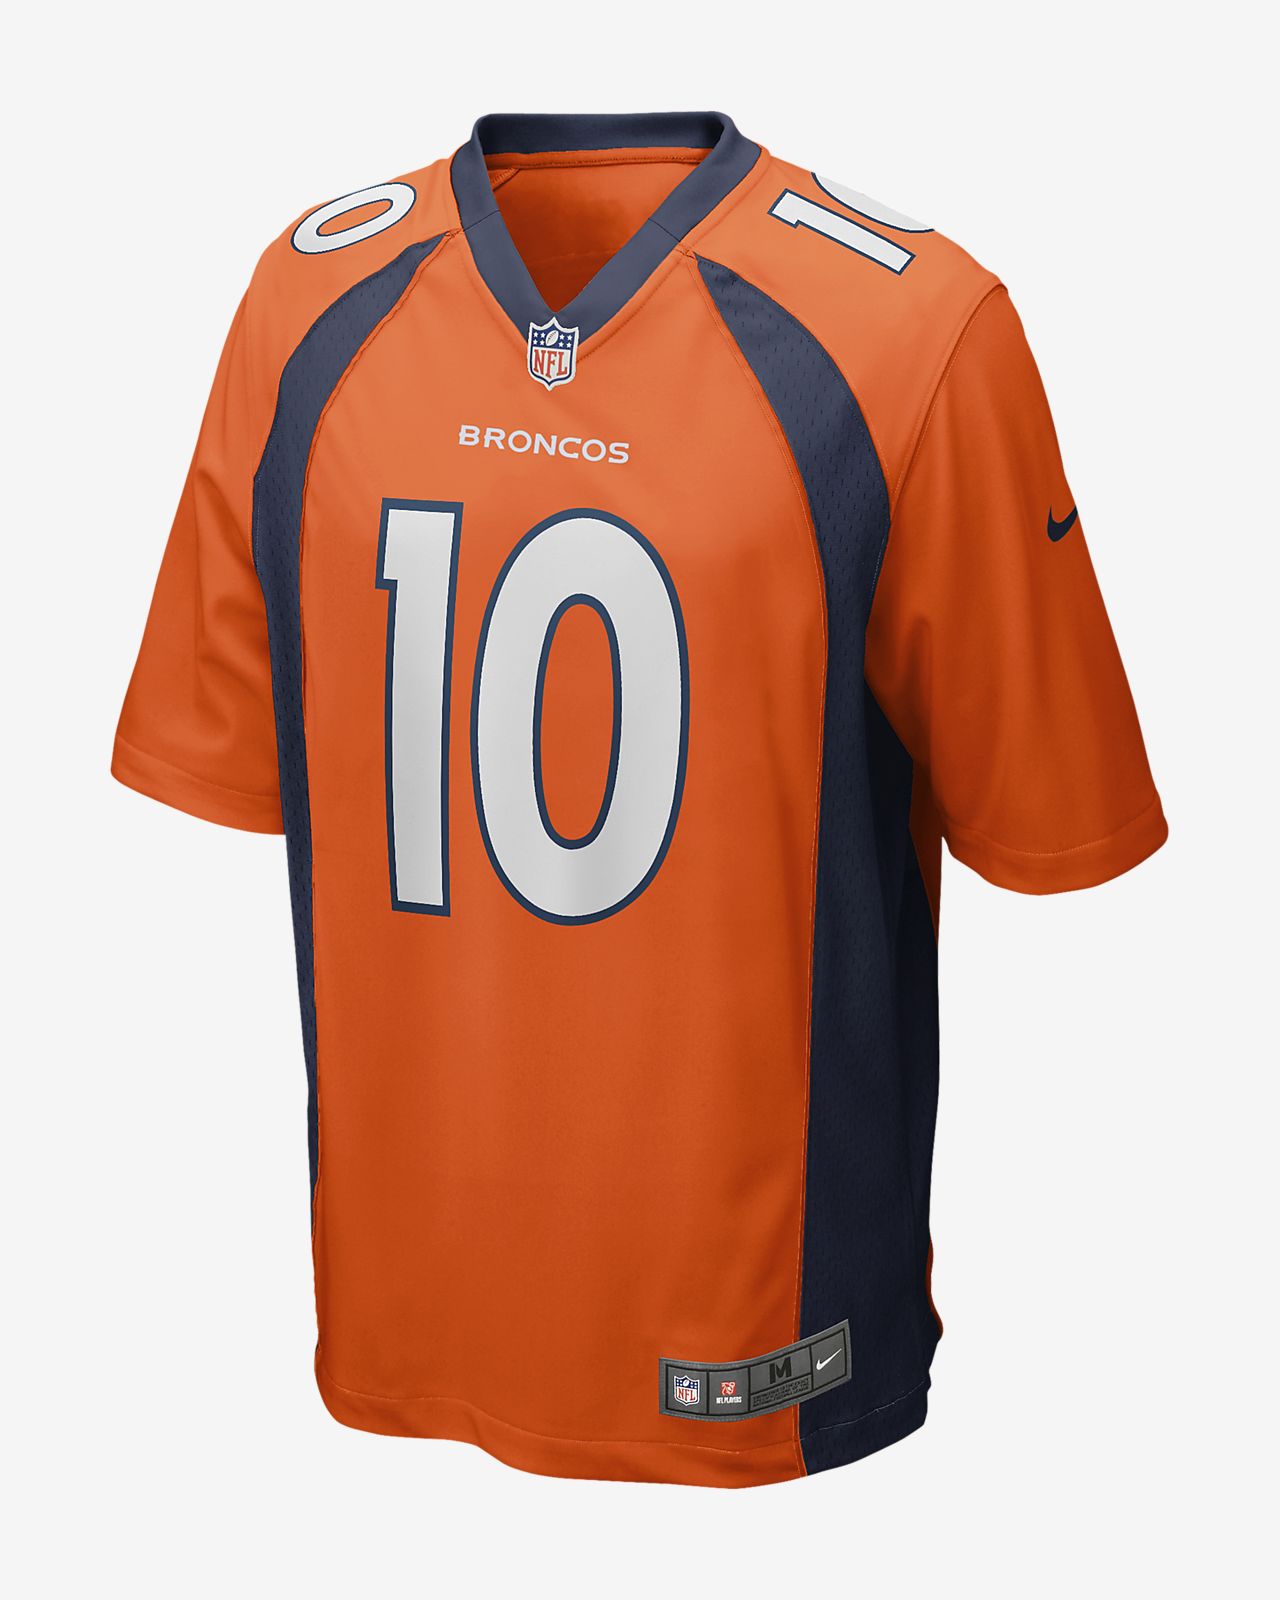 where can i get a broncos jersey